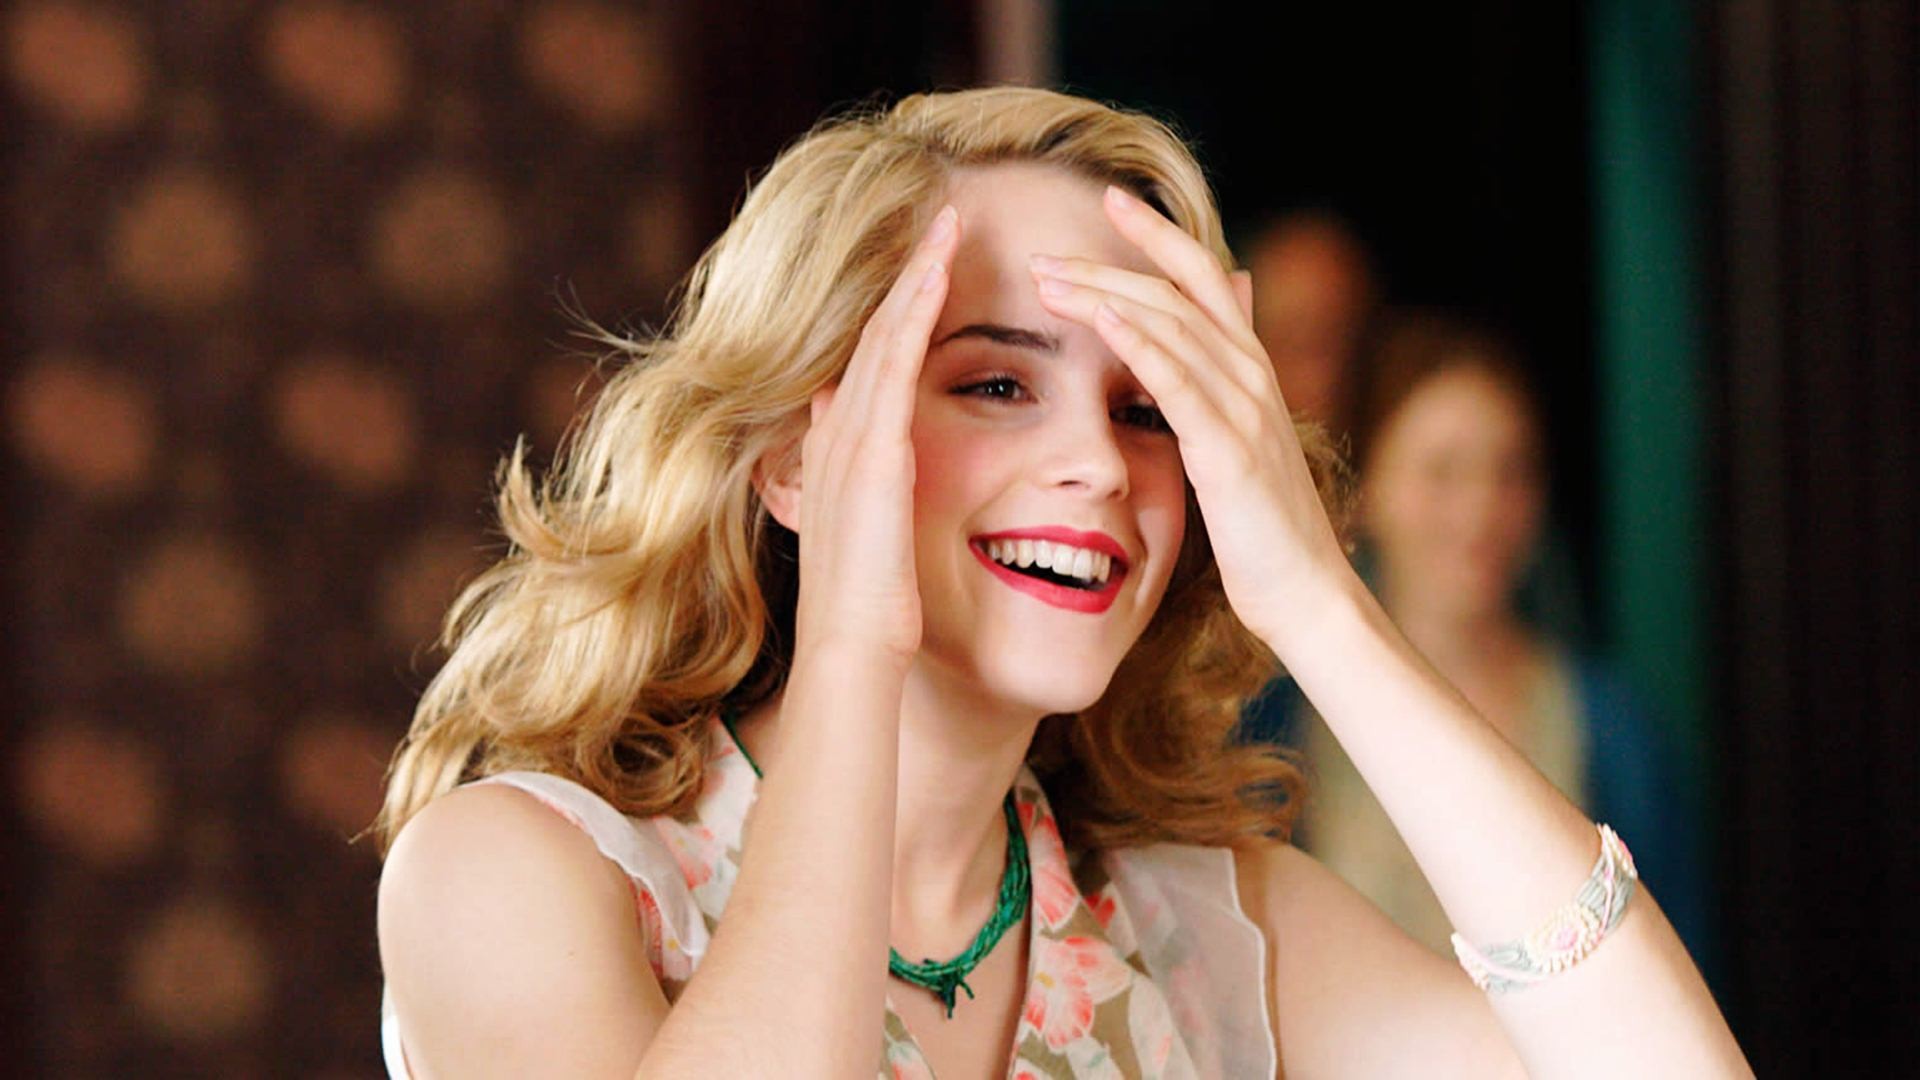 1920x1080 Why do many people find Emma Watson hot while I find her cute Quora